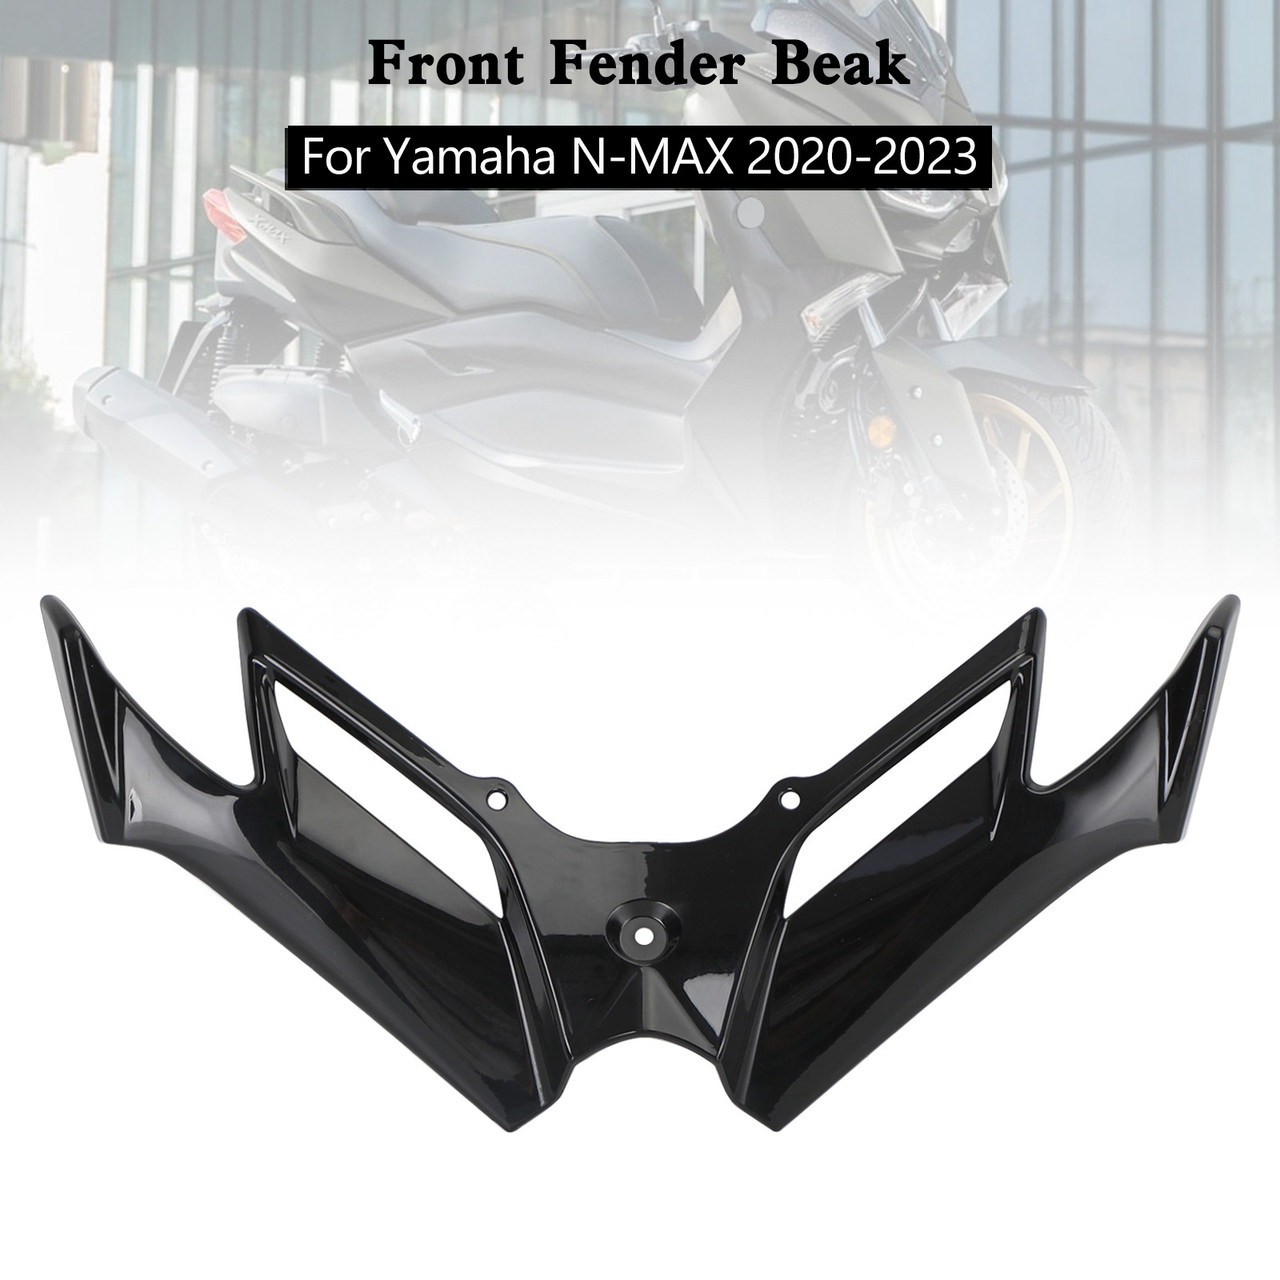 Front Fender Beak Nose Cone Extension For Yamaha N-MAX NMAX 2020-2023 BLK